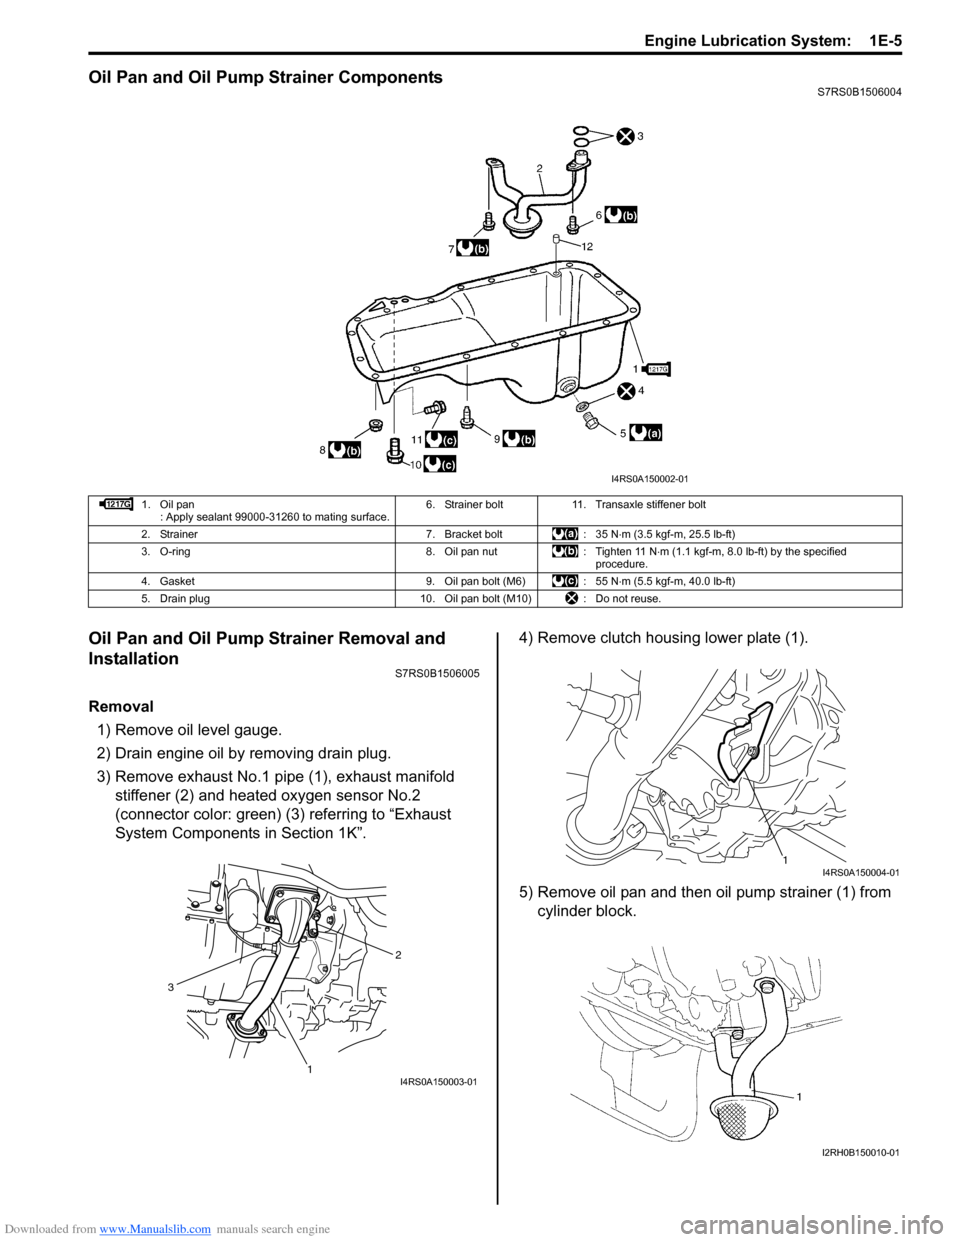 SUZUKI SWIFT 2006 2.G Service Workshop Manual Downloaded from www.Manualslib.com manuals search engine Engine Lubrication System:  1E-5
Oil Pan and Oil Pump Strainer ComponentsS7RS0B1506004
Oil Pan and Oil Pump Strainer Removal and 
Installation
